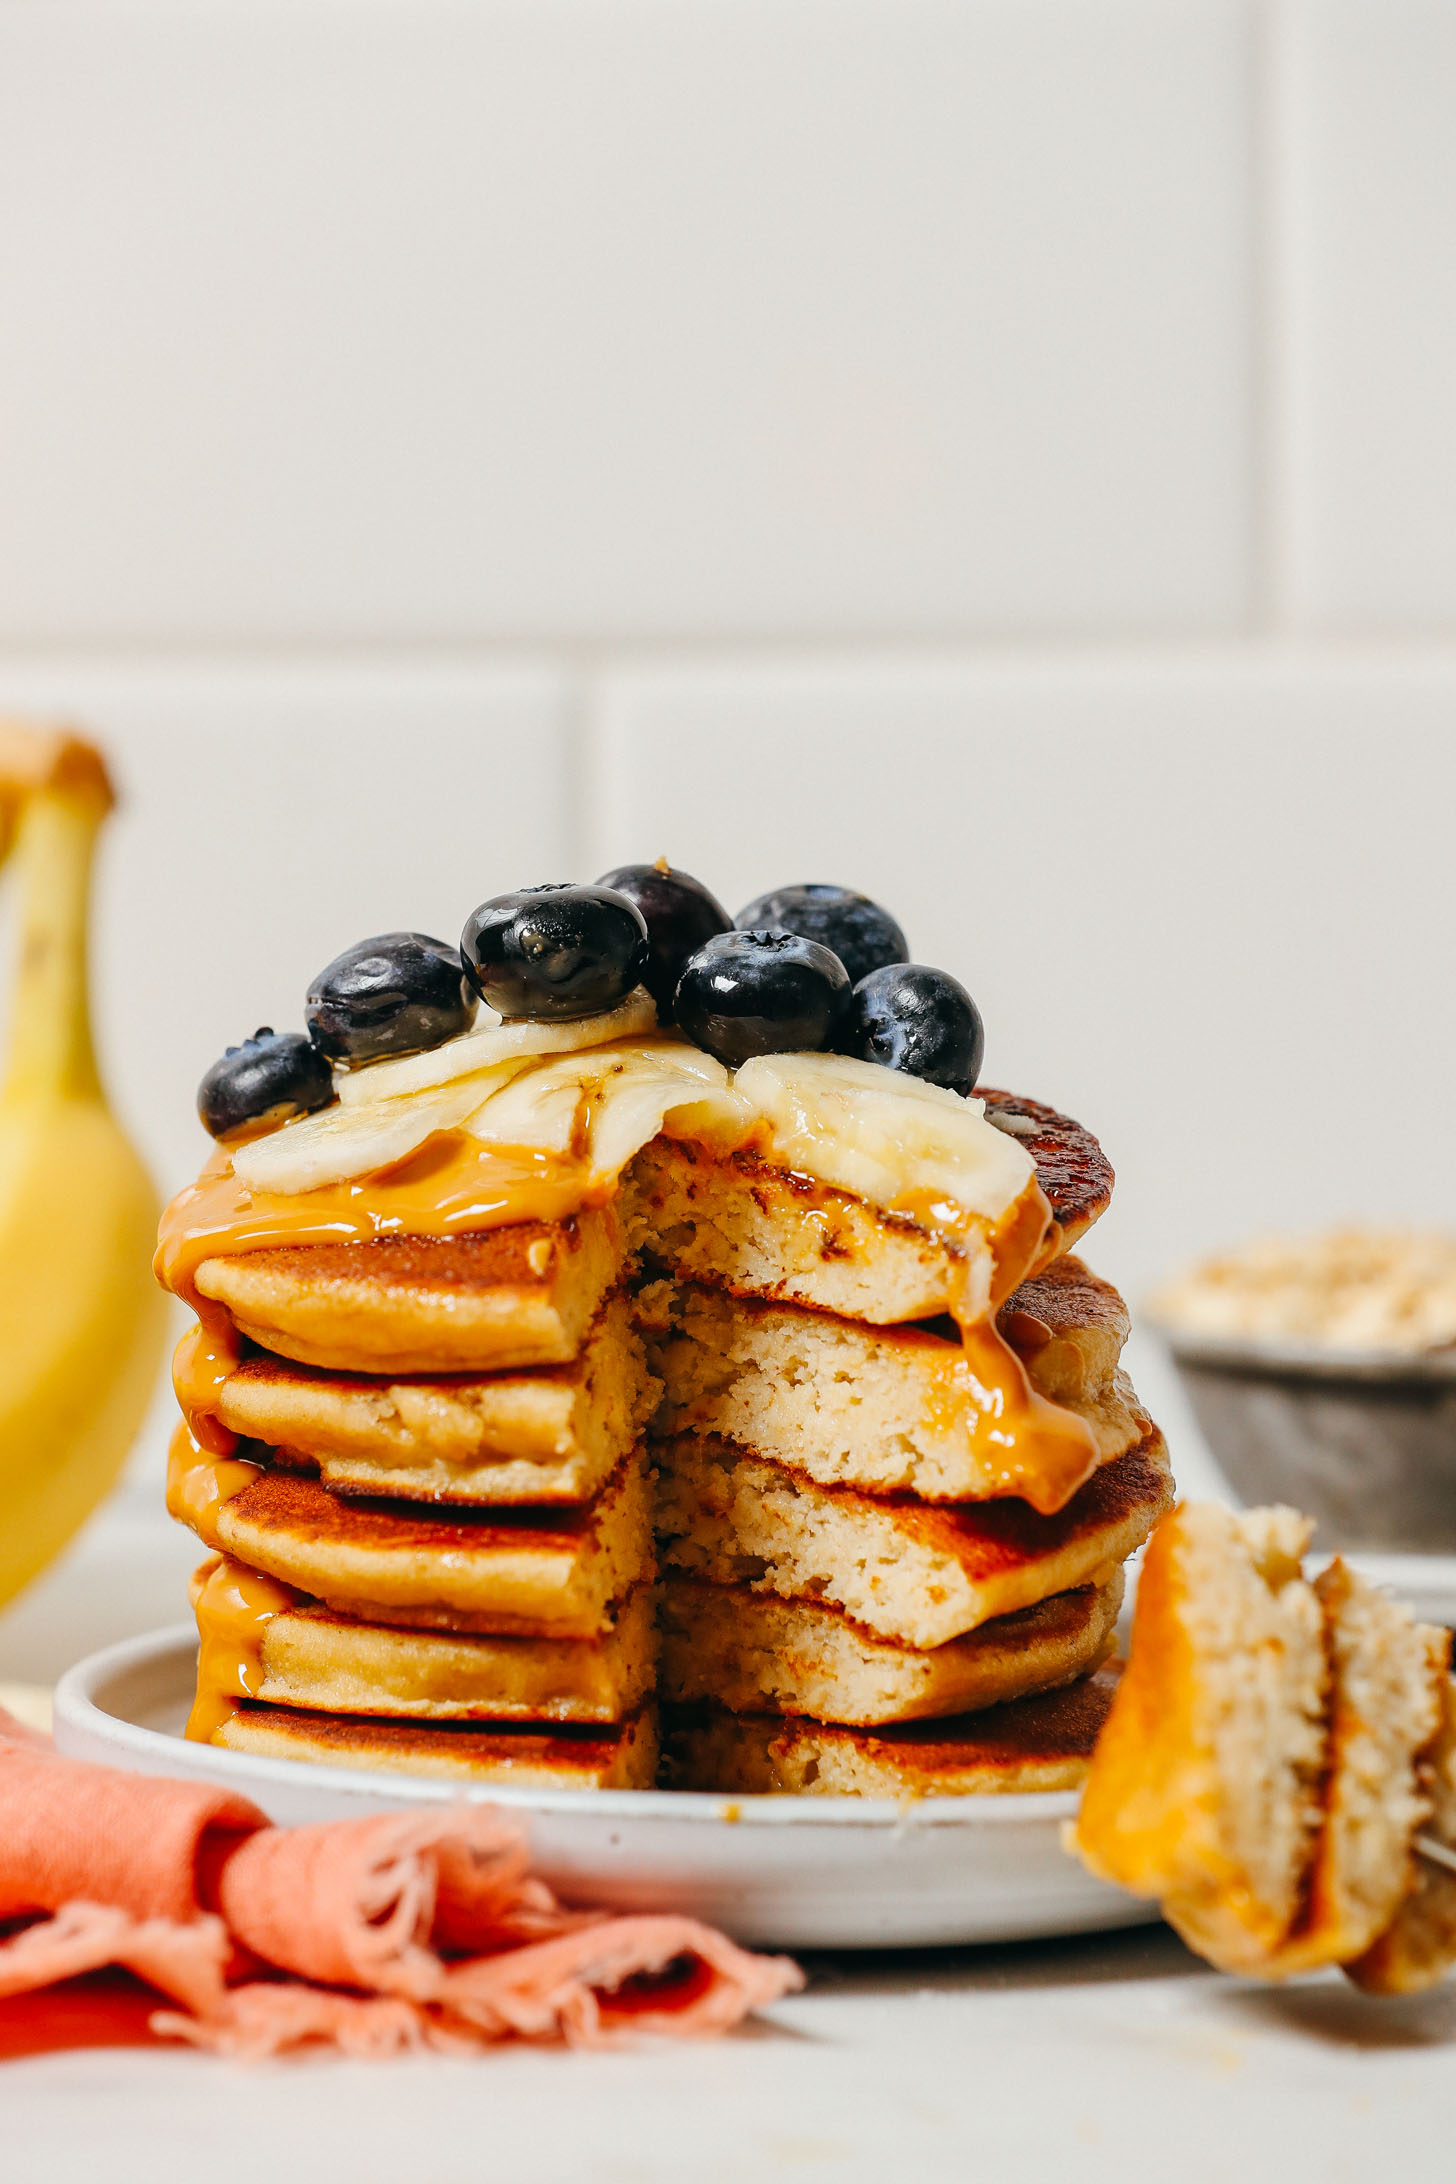 Sliced removed from a stack of Banana Pancakes topped with peanut butter and fresh fruit